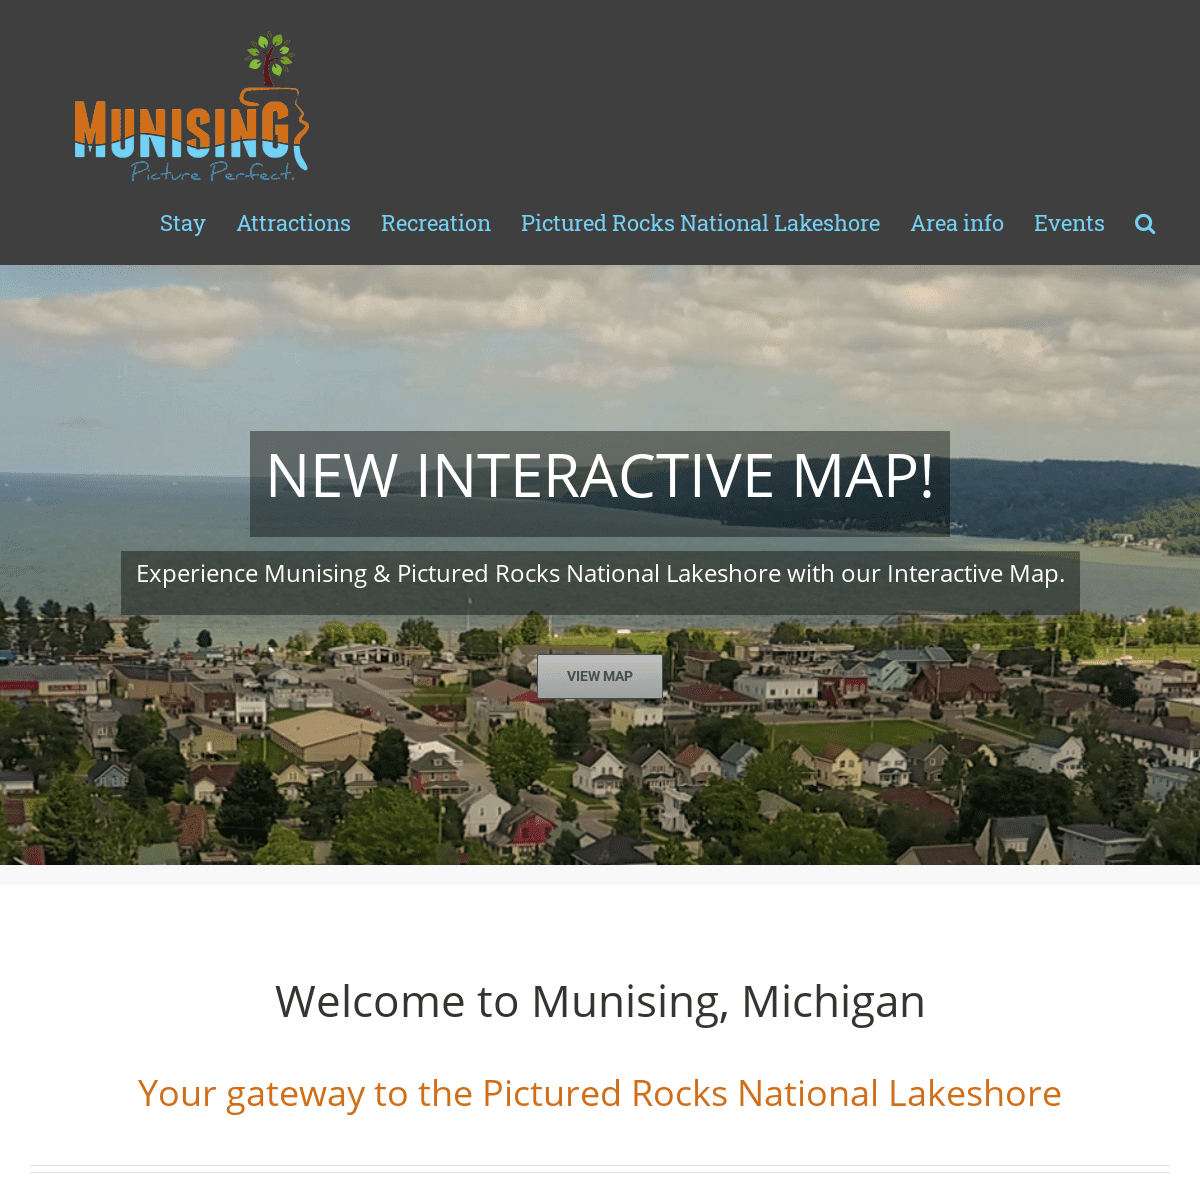 A complete backup of munising.org